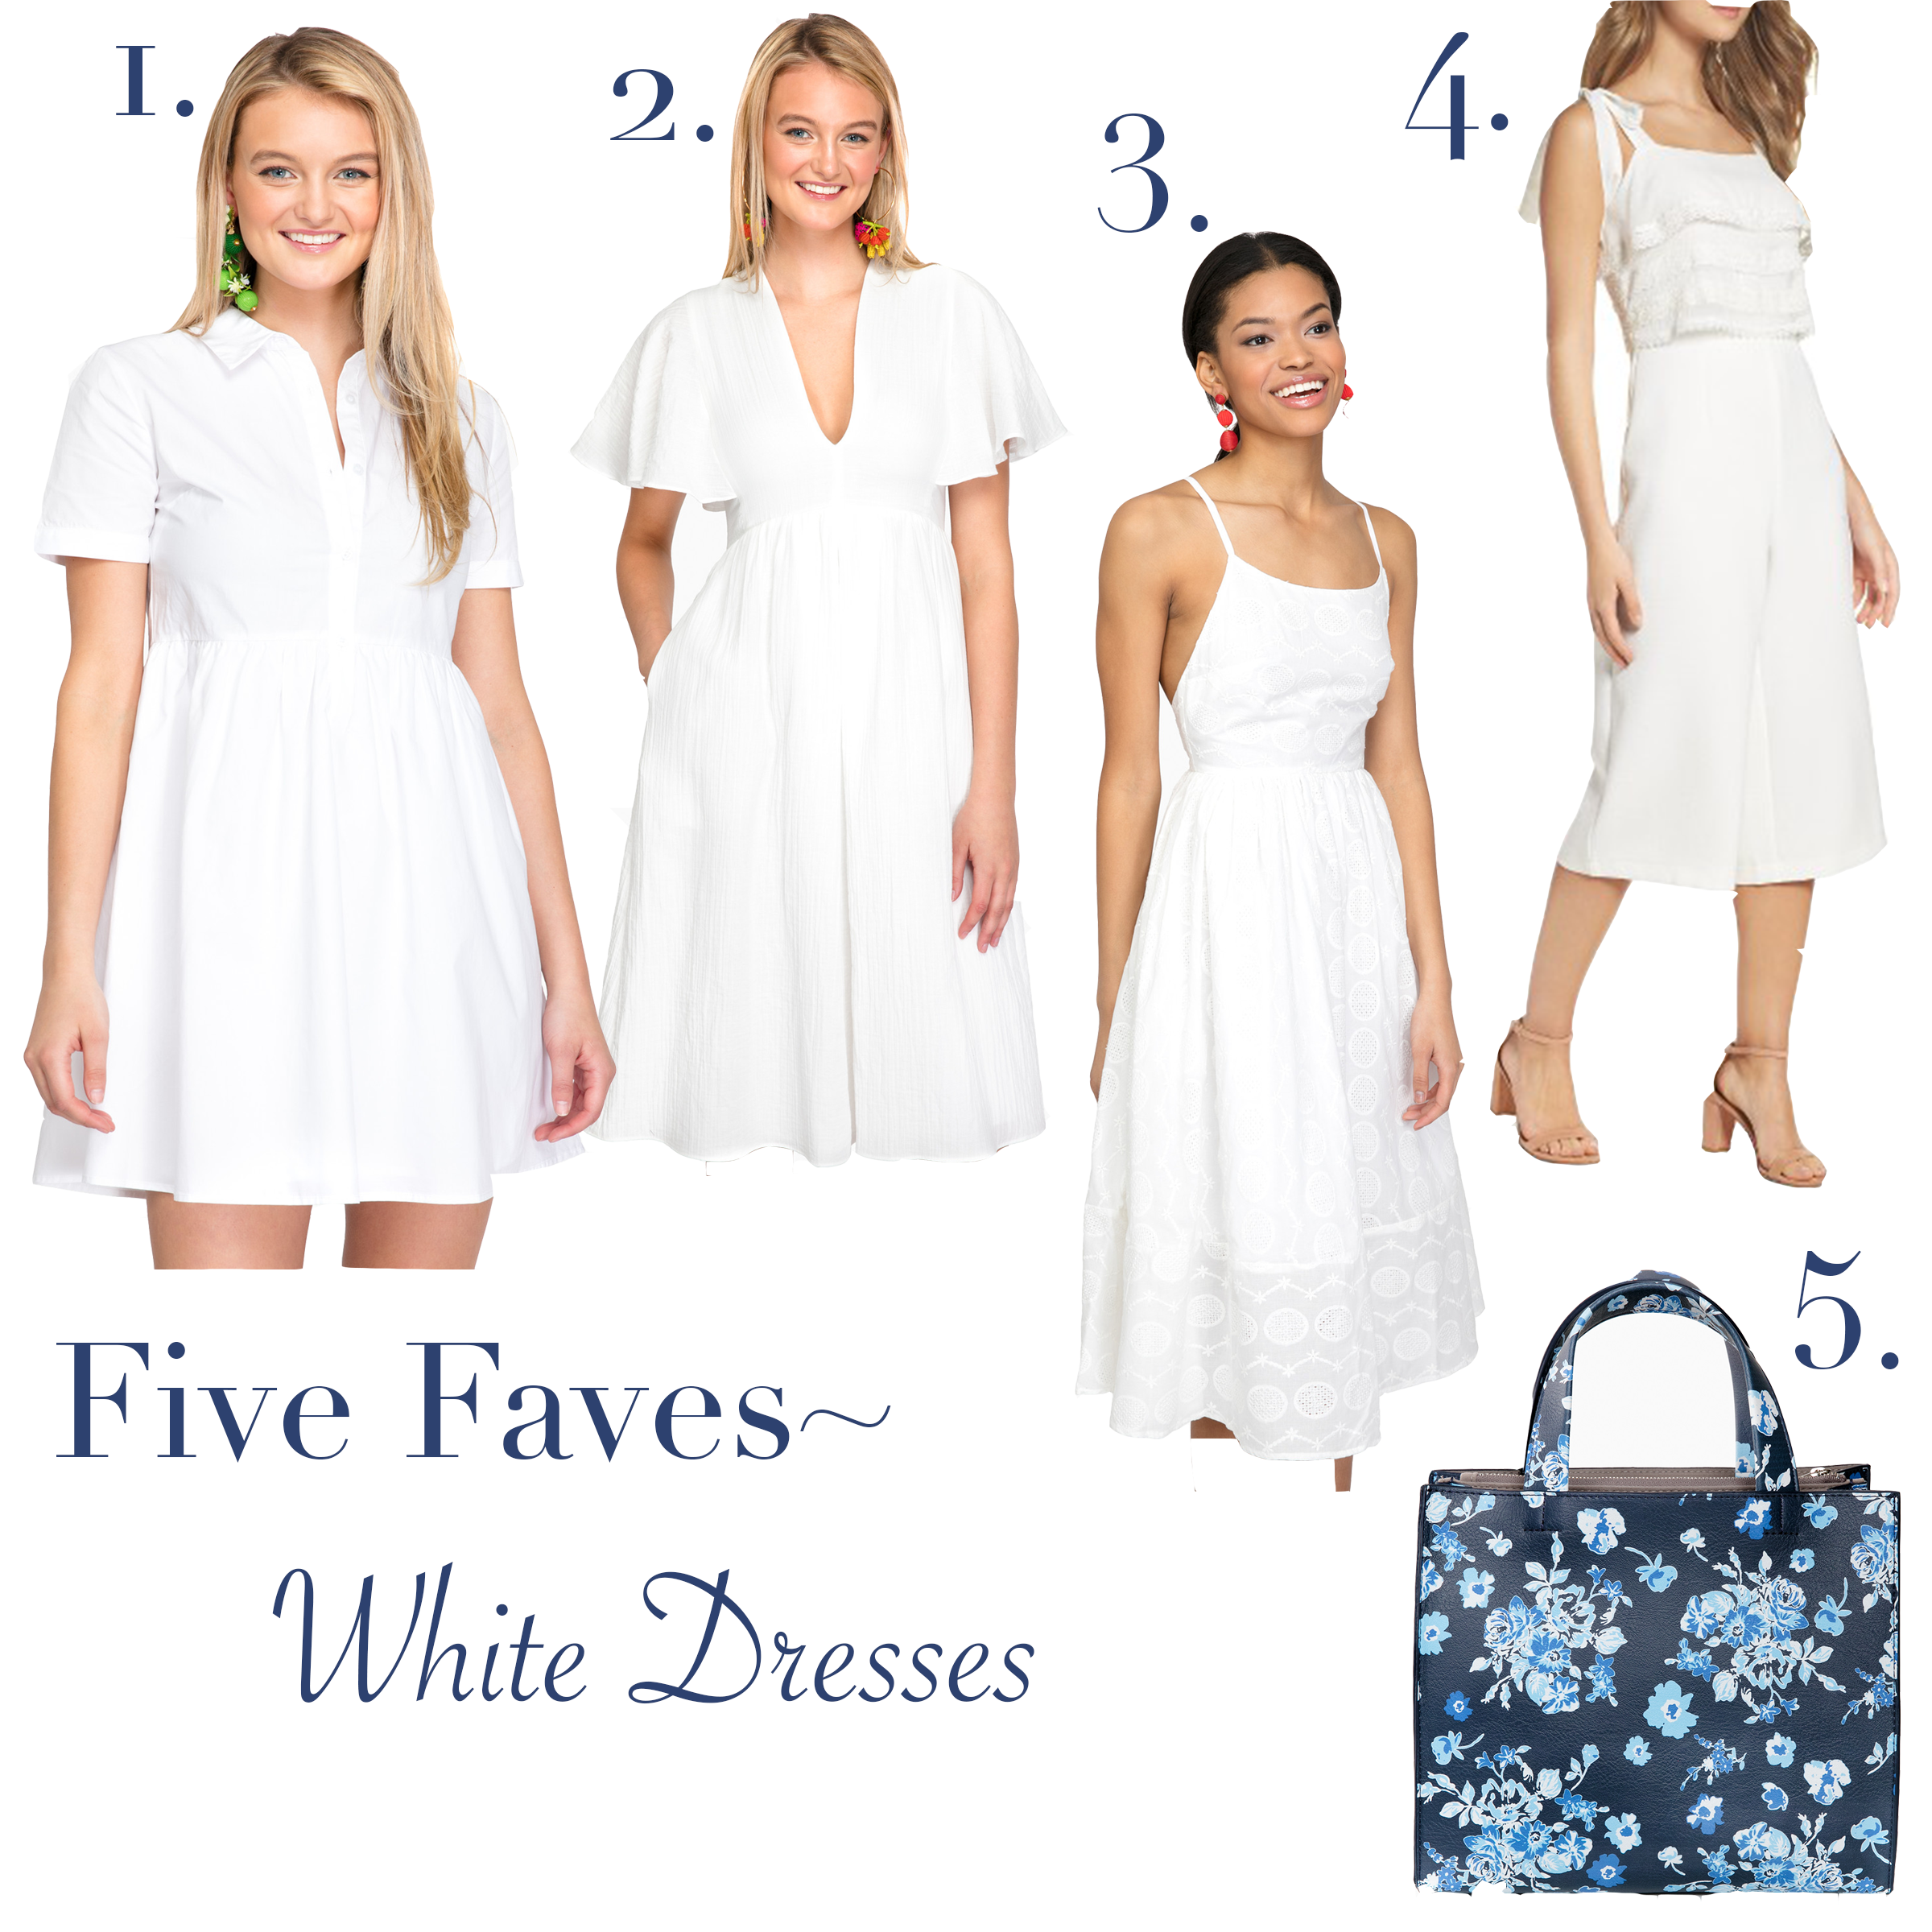 Five Faves~ White Dresses